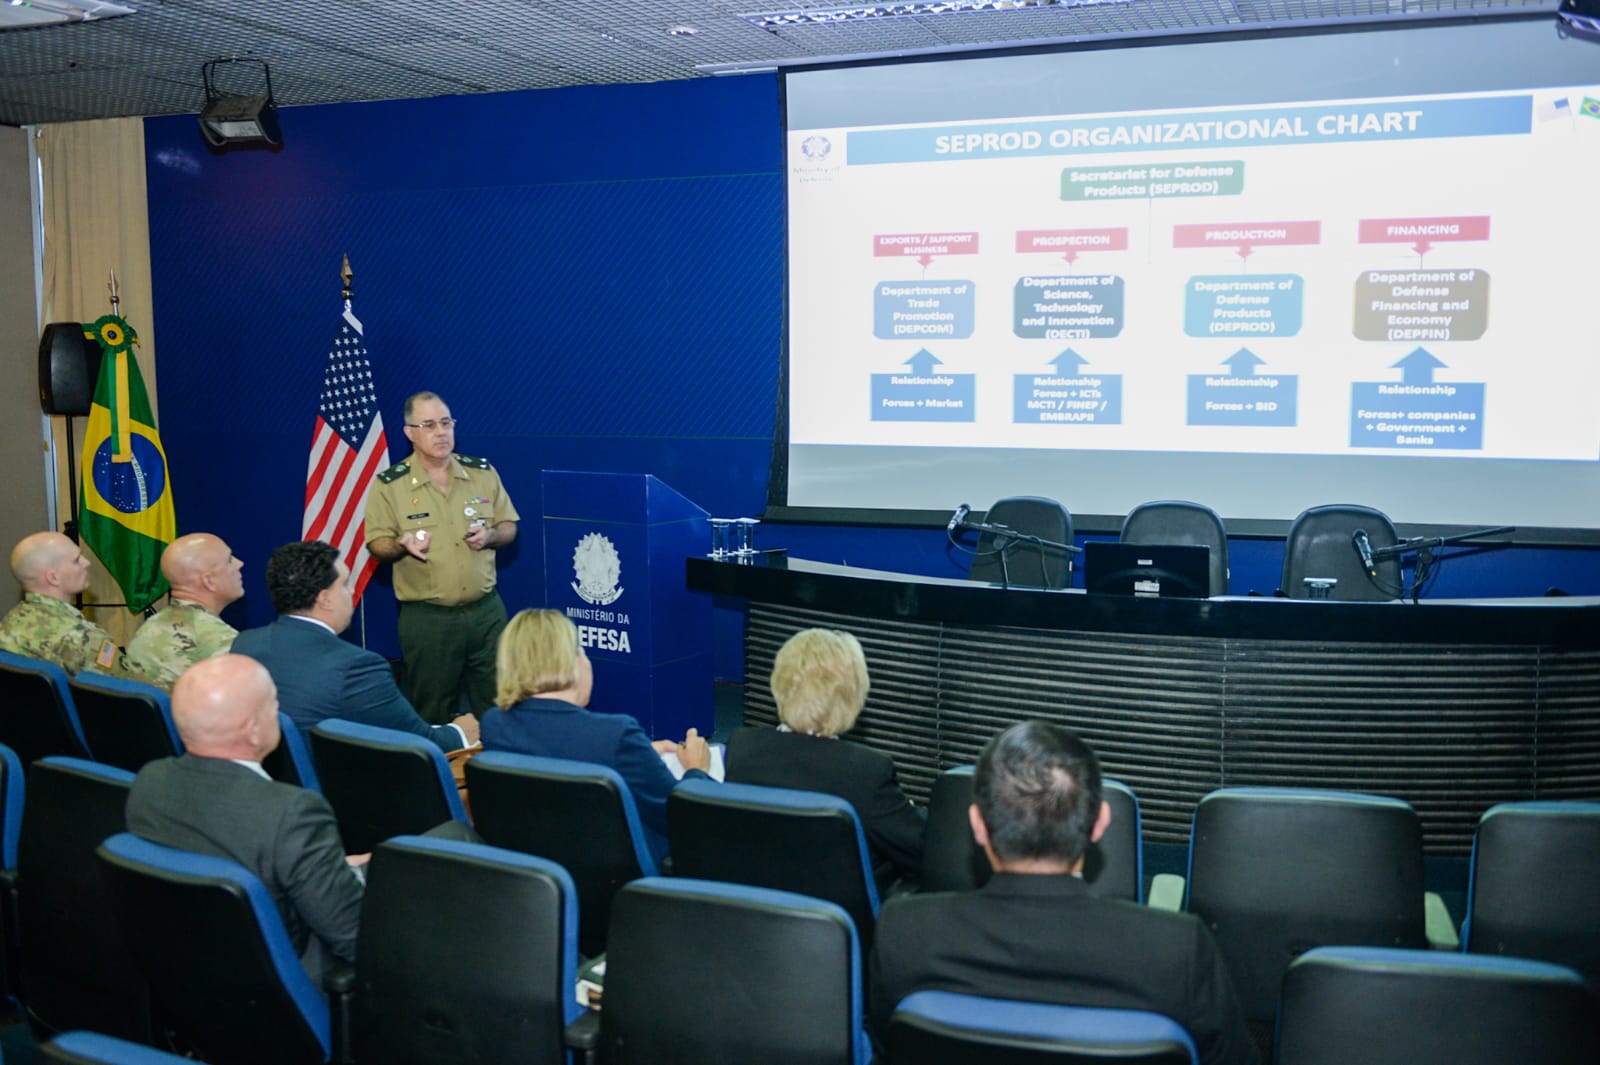 Brazilian Ministry of Defense receives a visit from a delegation from the United States to discuss exports and cooperation